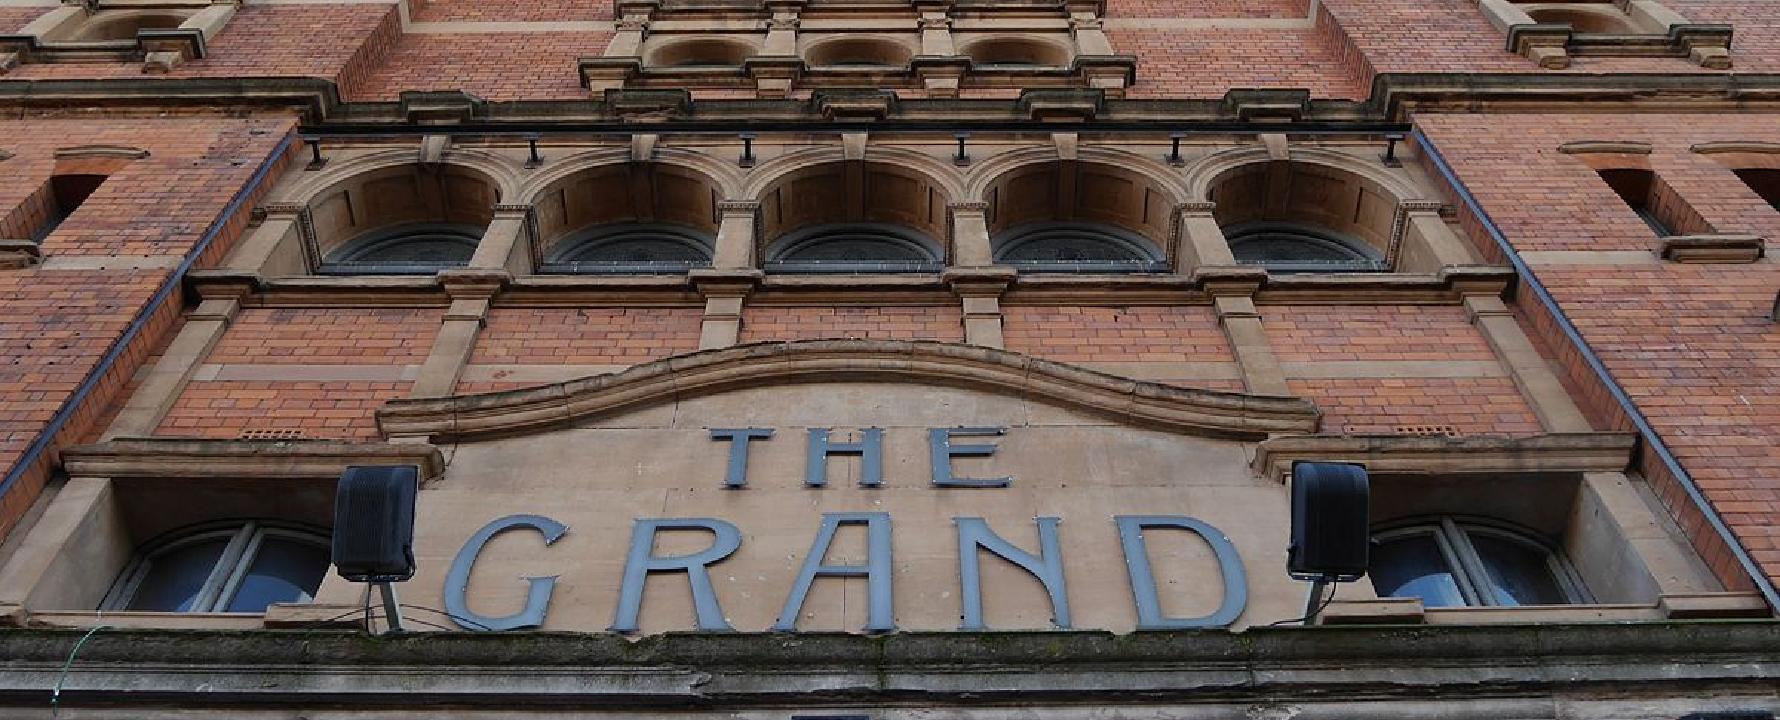 Promotional photograph of The Grand.